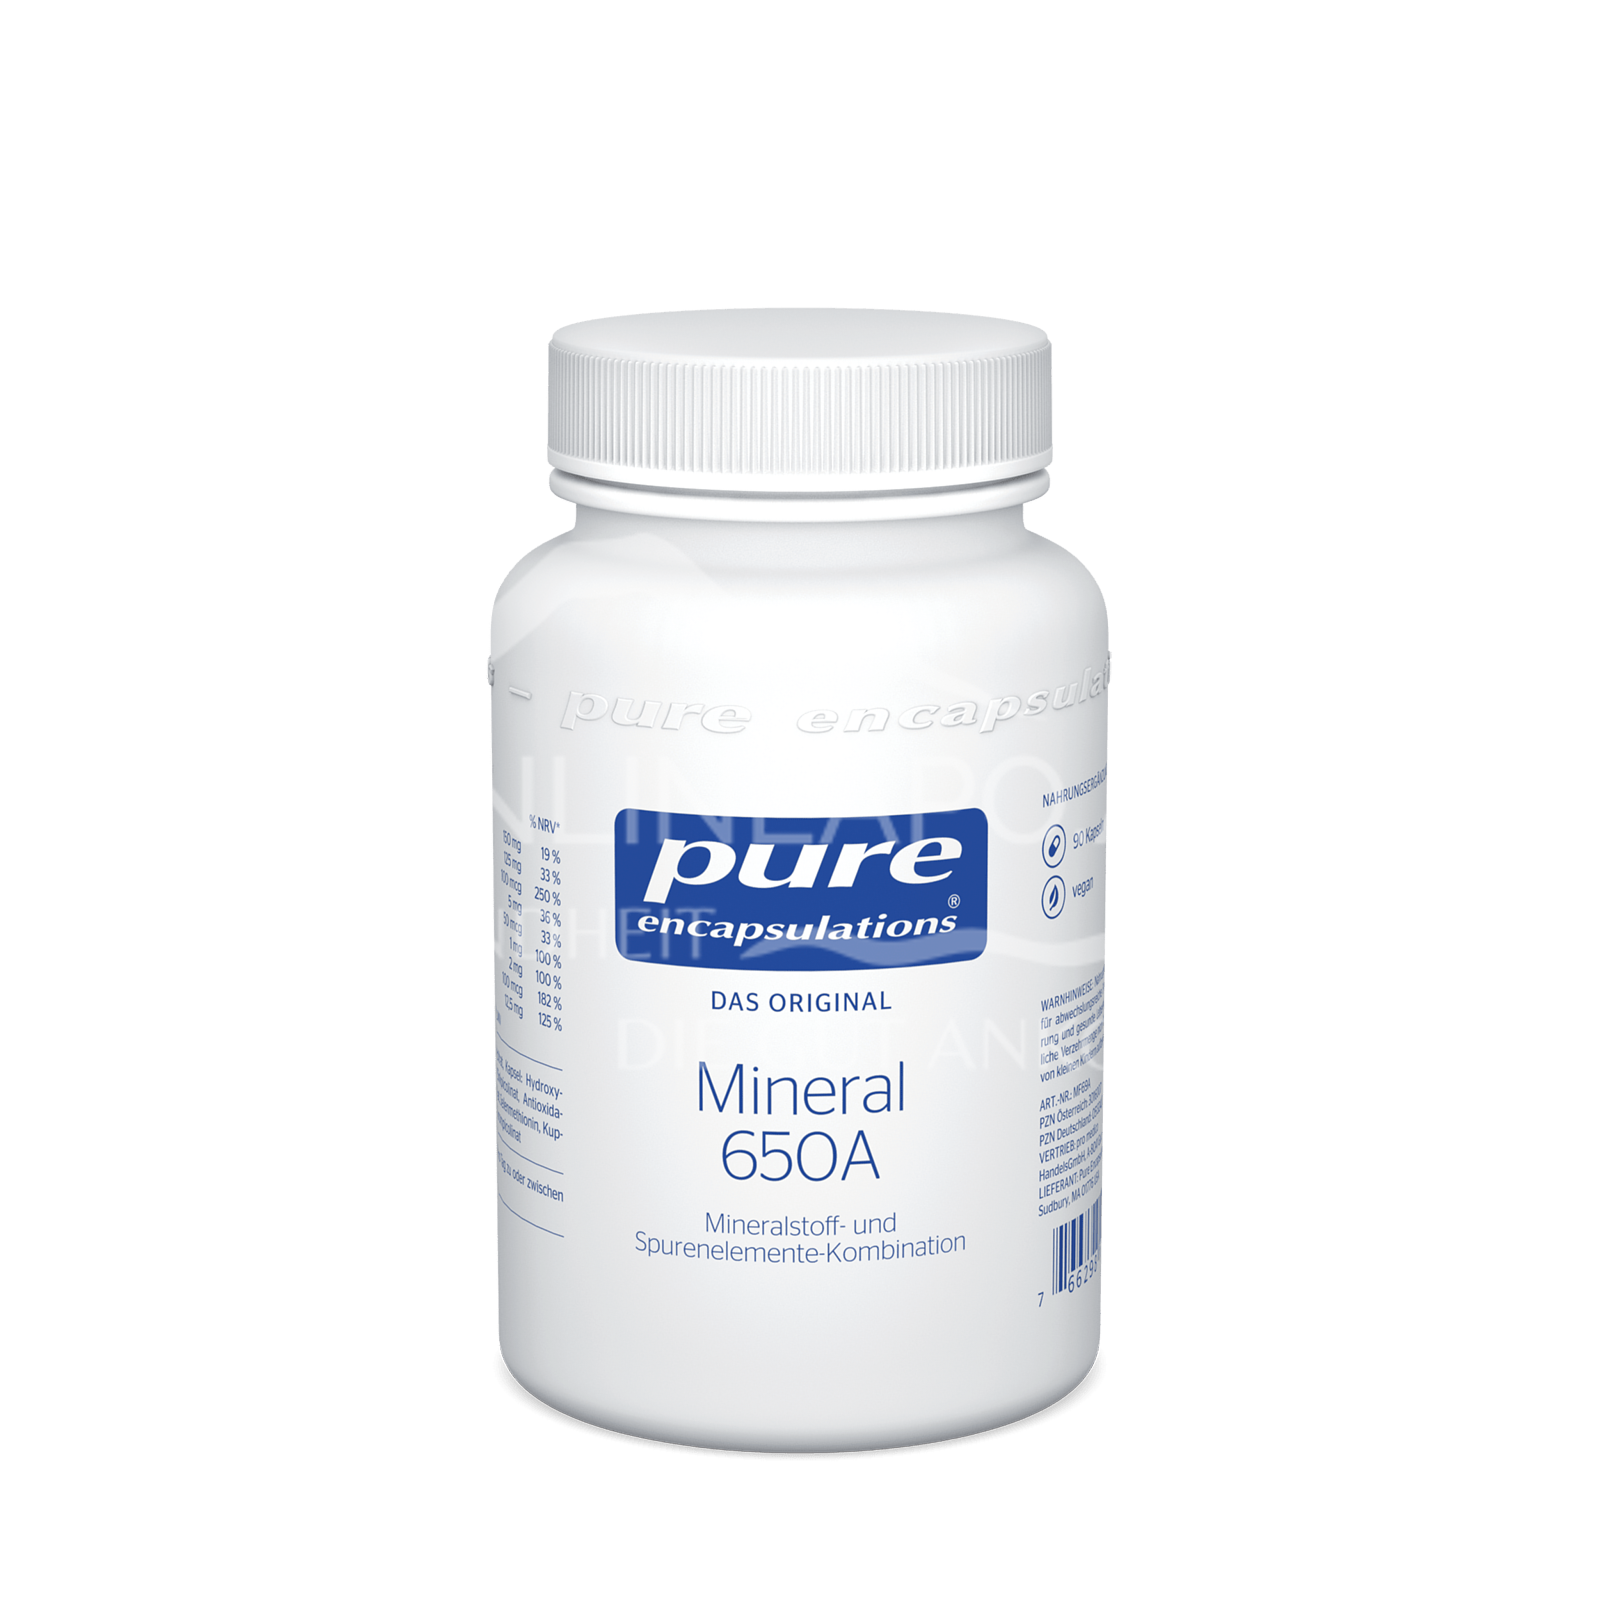 pure encapsulations® Mineral 650A